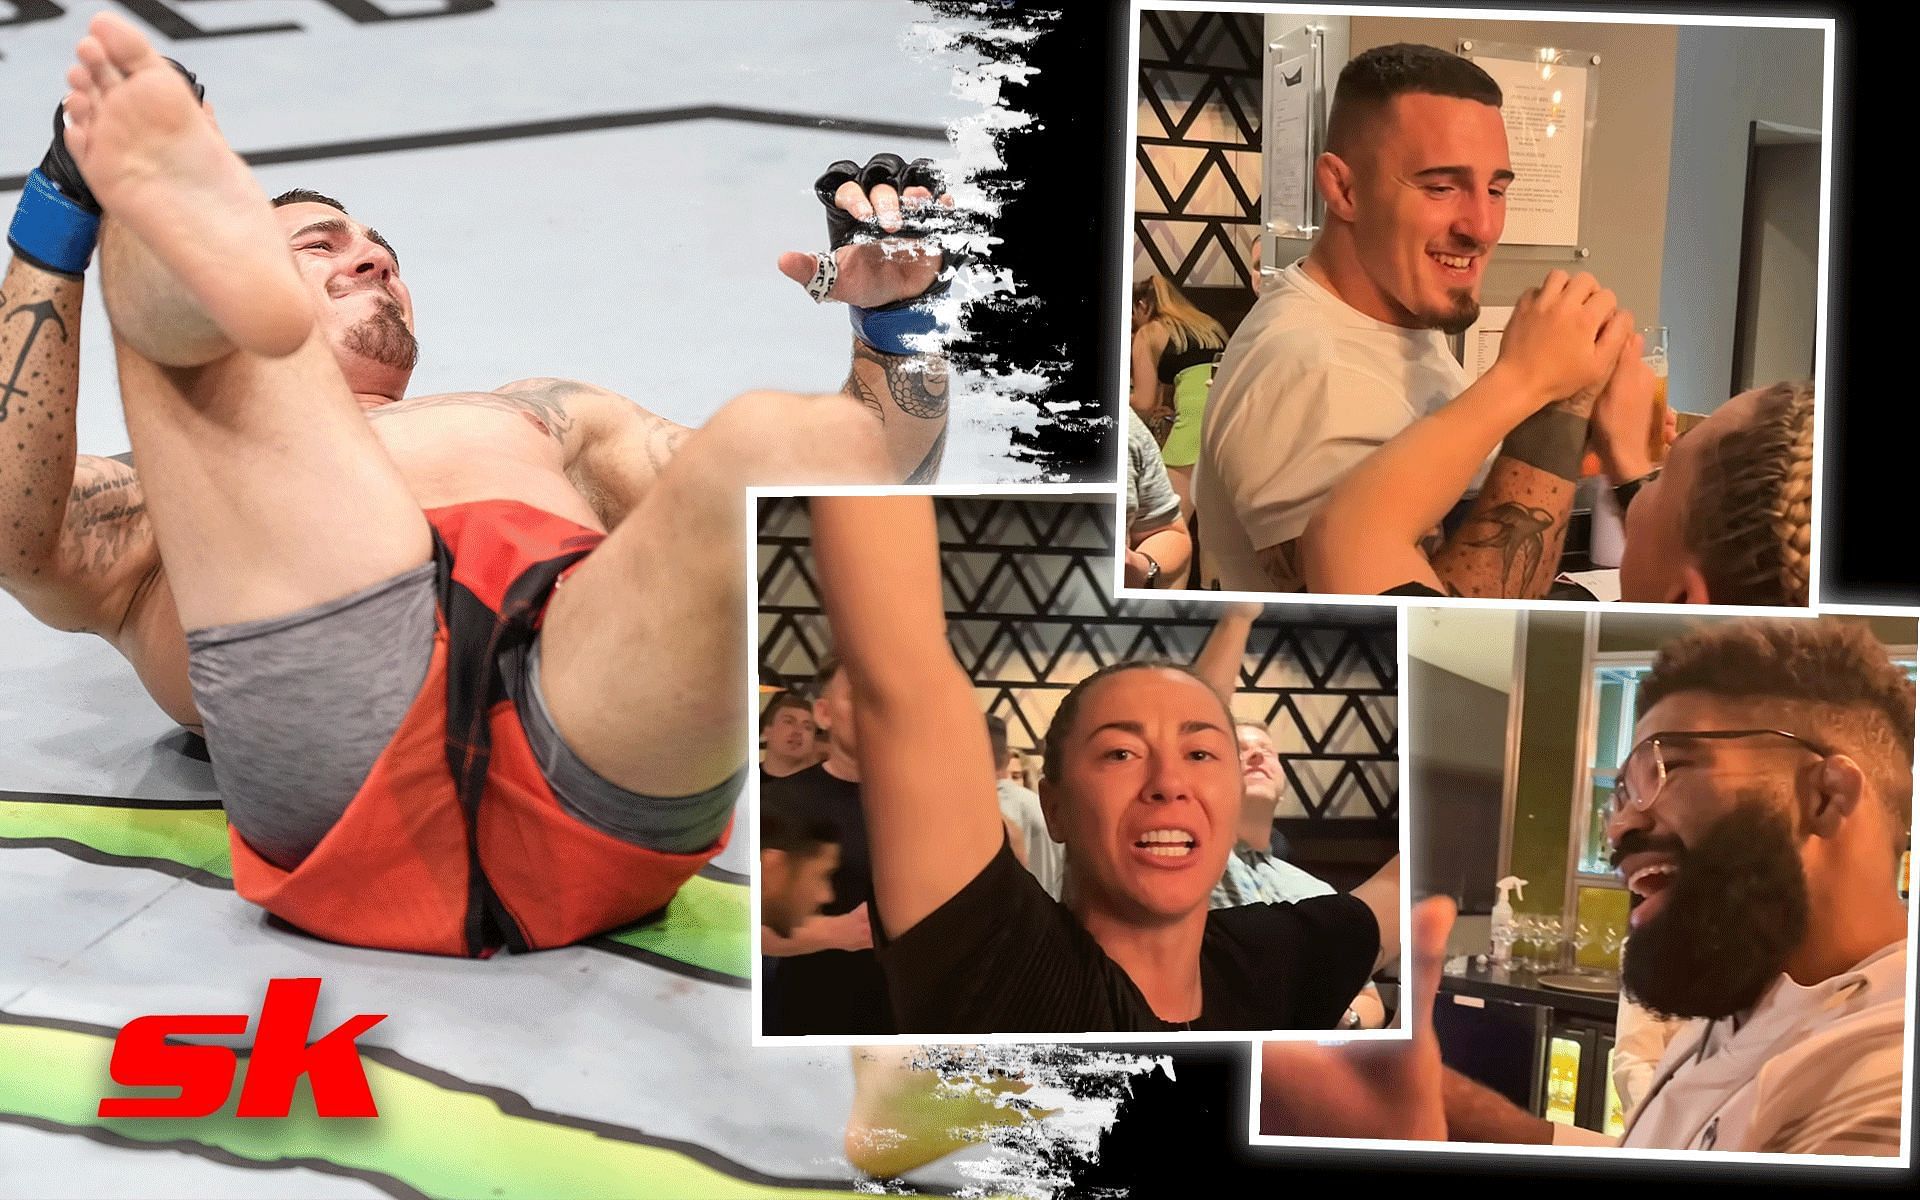 Tom Aspinall (left and top right), Molly McCann (center), and Chris Curtis (bottom right) [Images courtesy: left image from Twitter @MirrorFighting, rest of the images from TheMacLife YouTube channel]